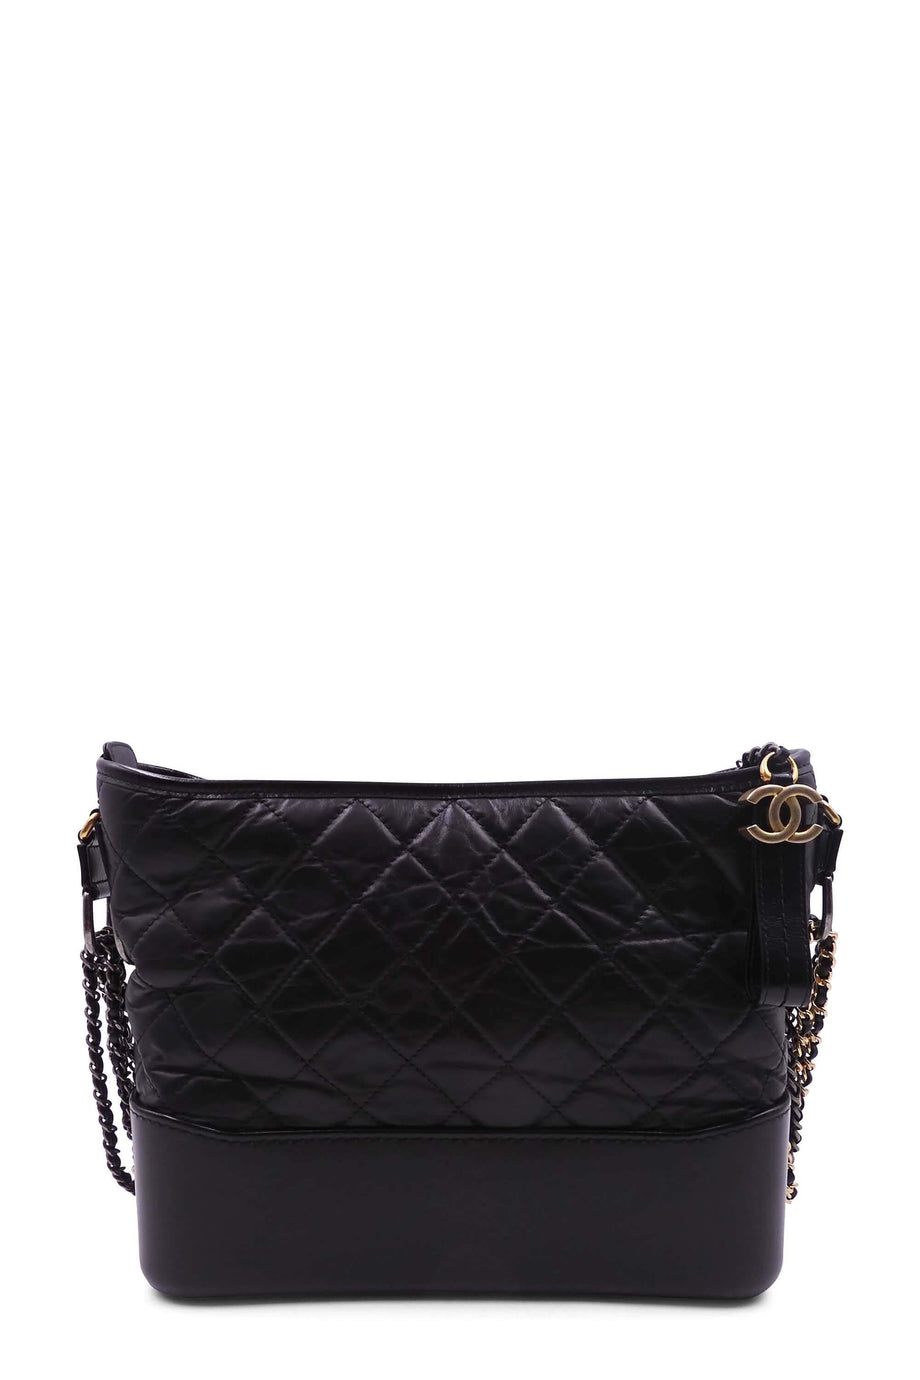 Buy Authentic, Preloved Chanel Medium Gabrielle Hobo Black Bags from Second  Edit by Style Theory